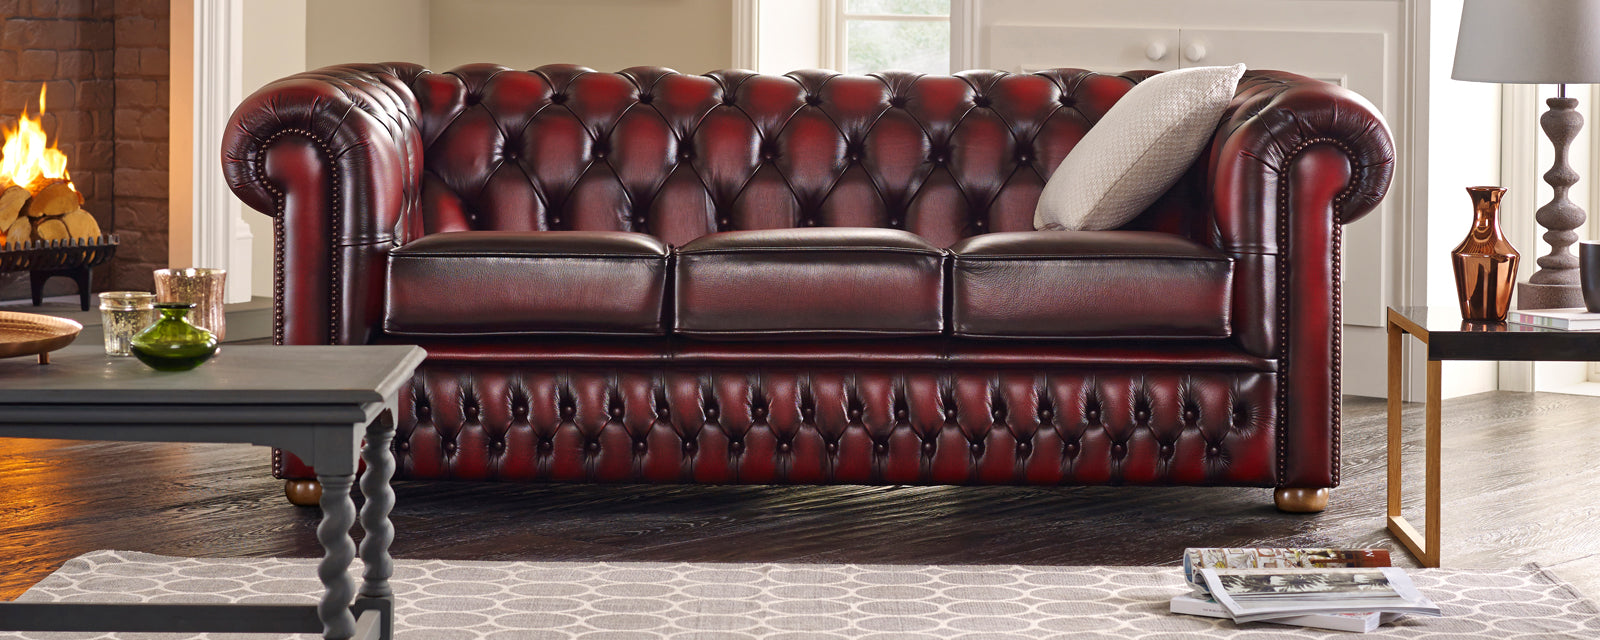 The Best Leathers for Making Furniture and Decor